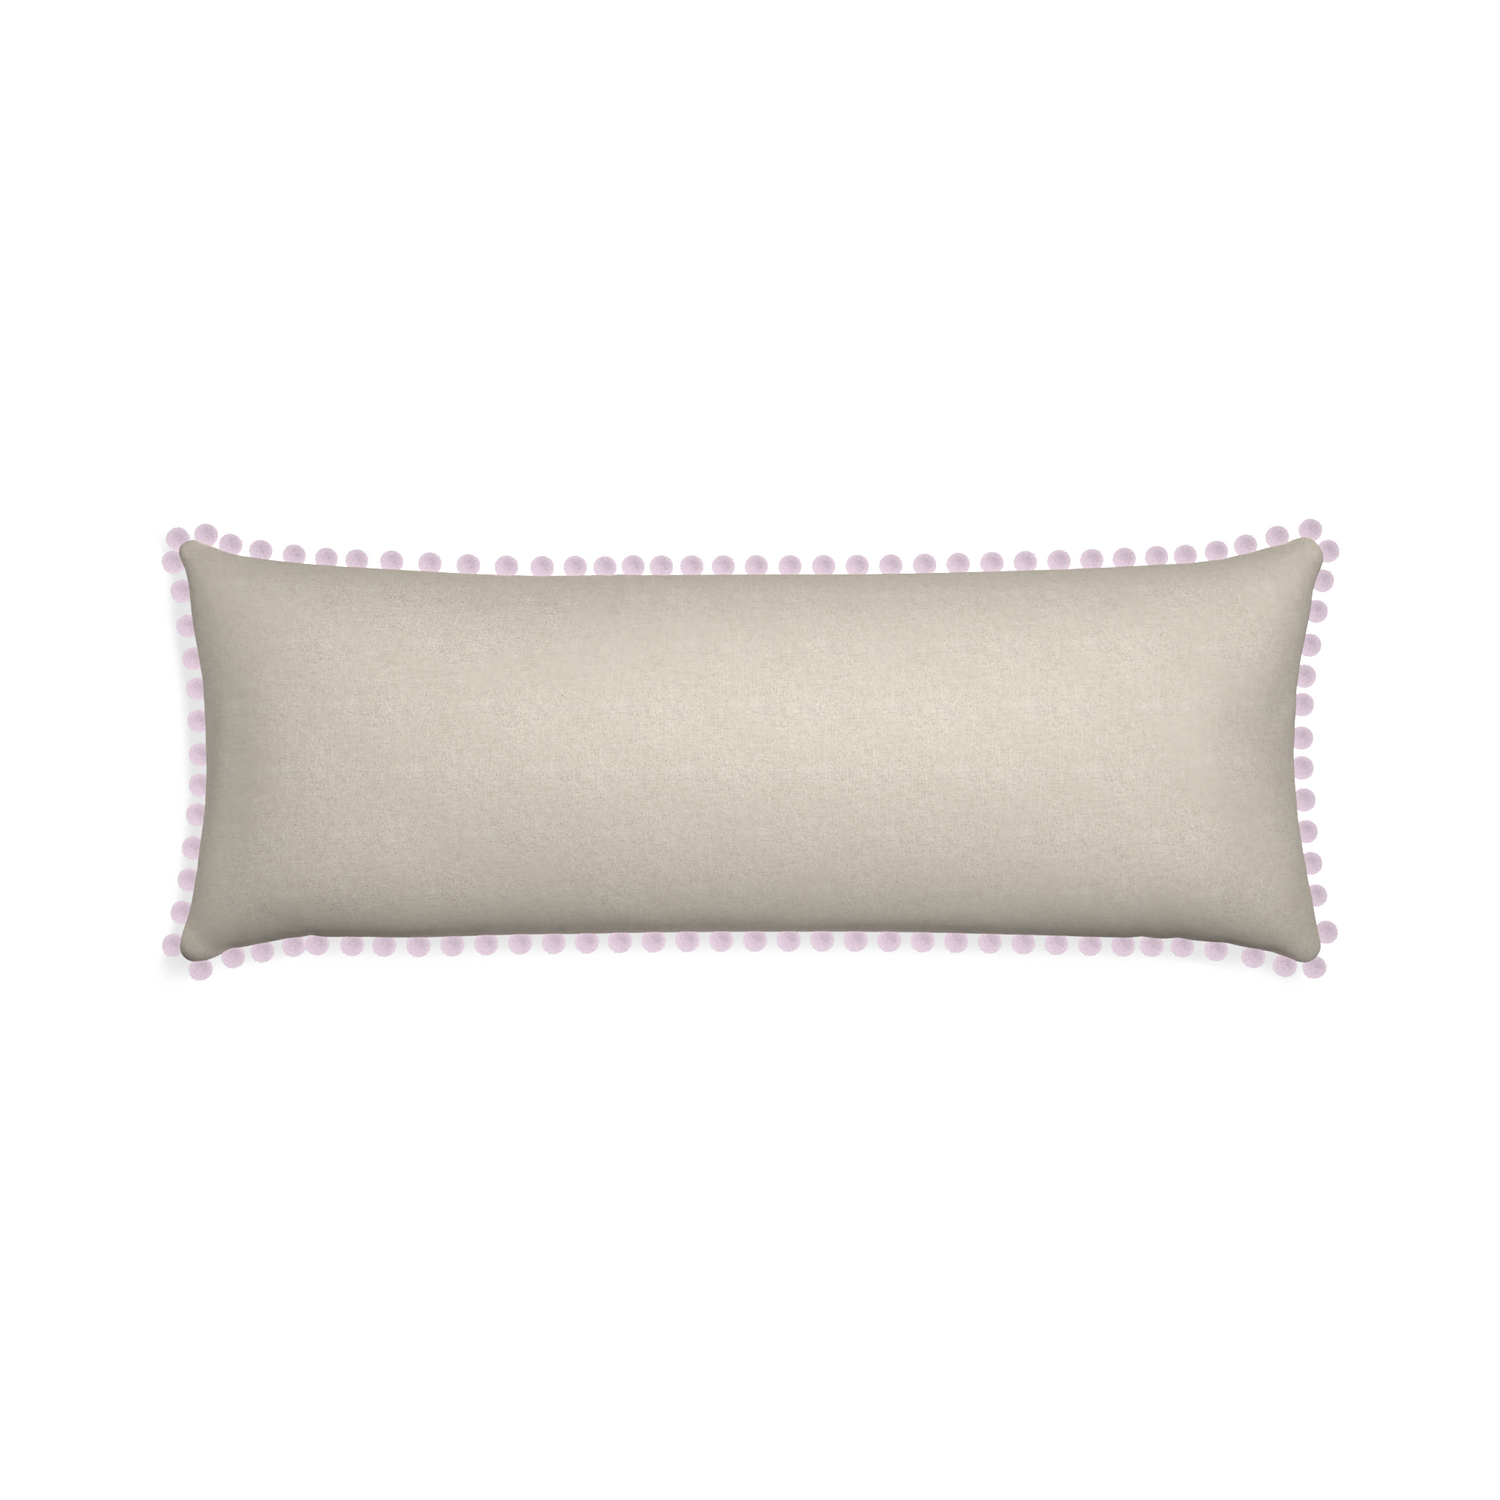 Xl-lumbar oat custom light brownpillow with l on white background